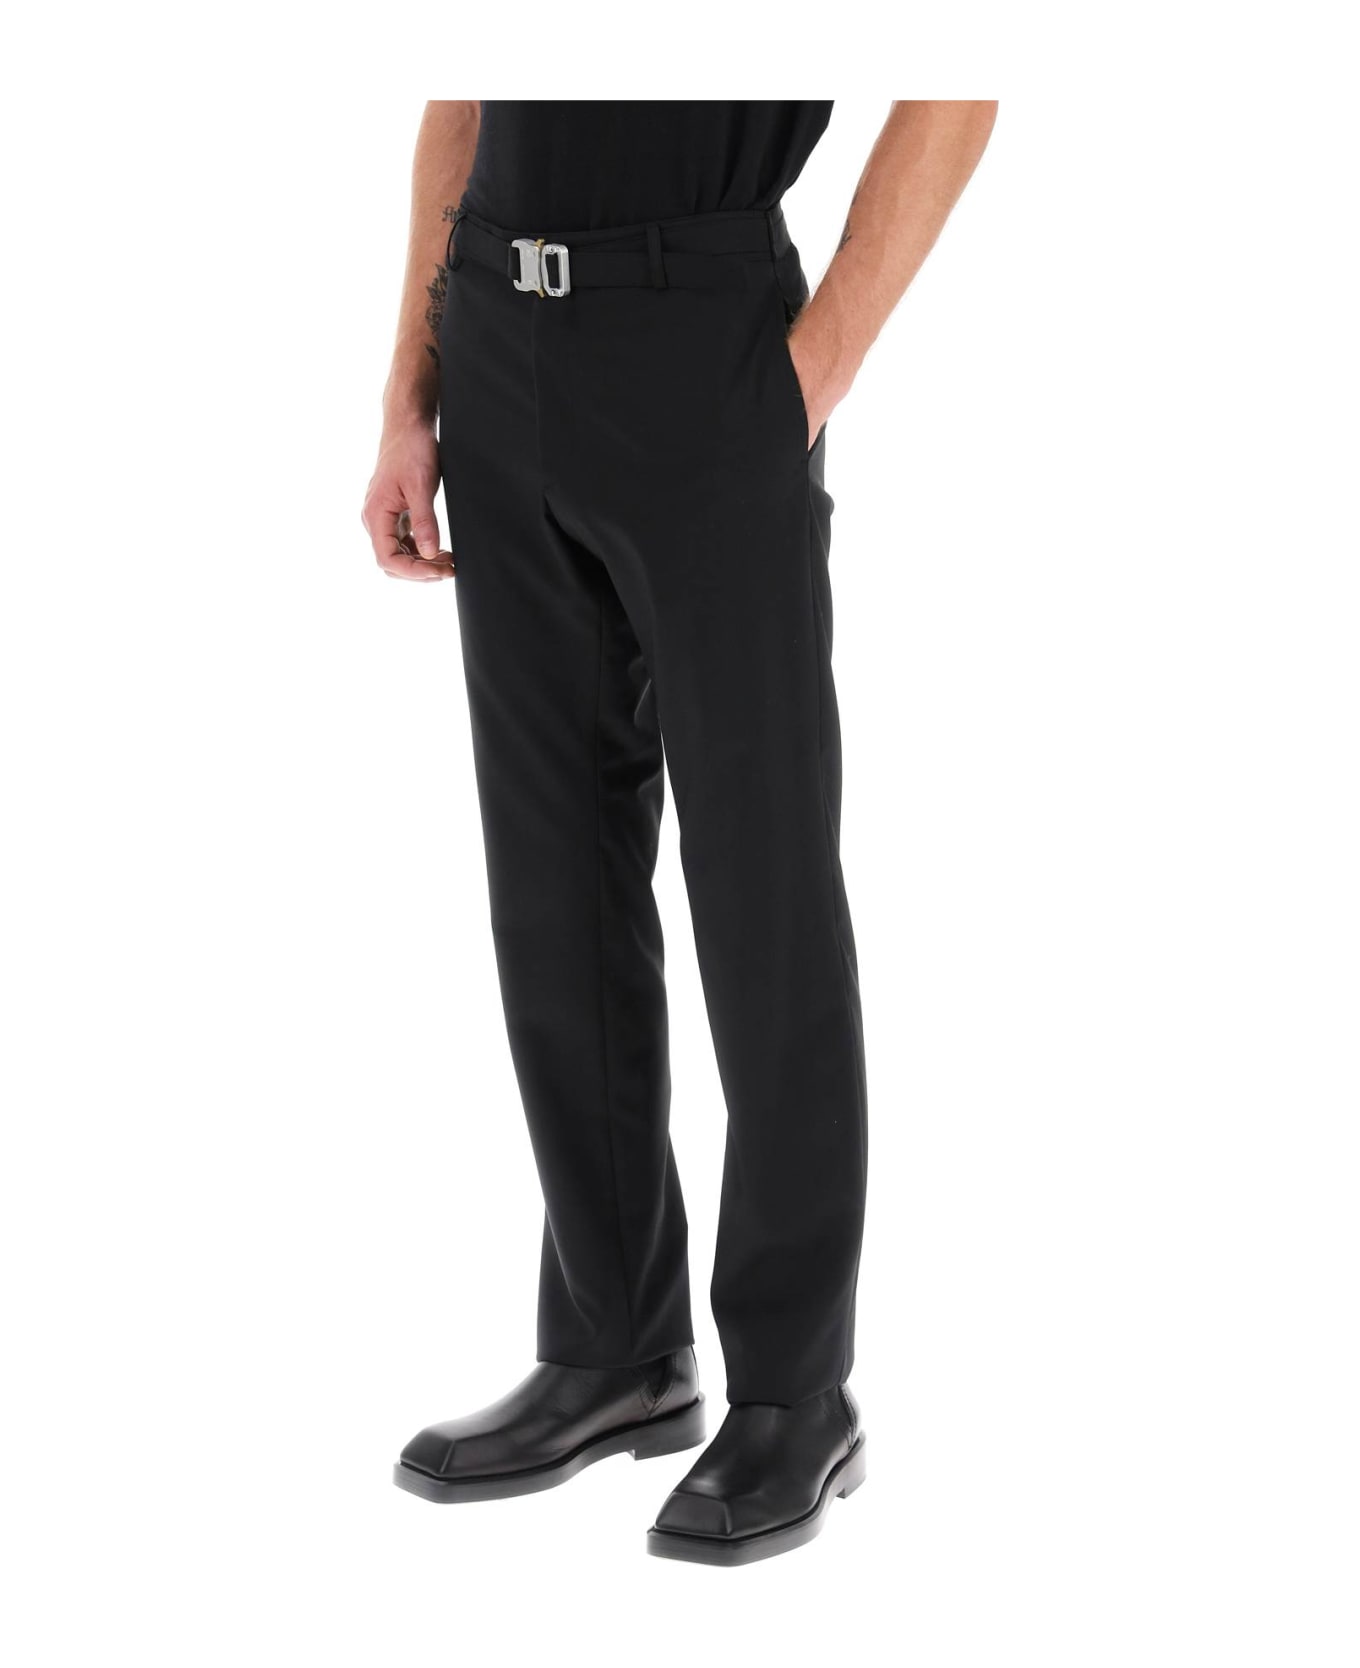 1017 ALYX 9SM Pants With Built-in Belt And Parachute Buckle - BLACK (Black) ボトムス